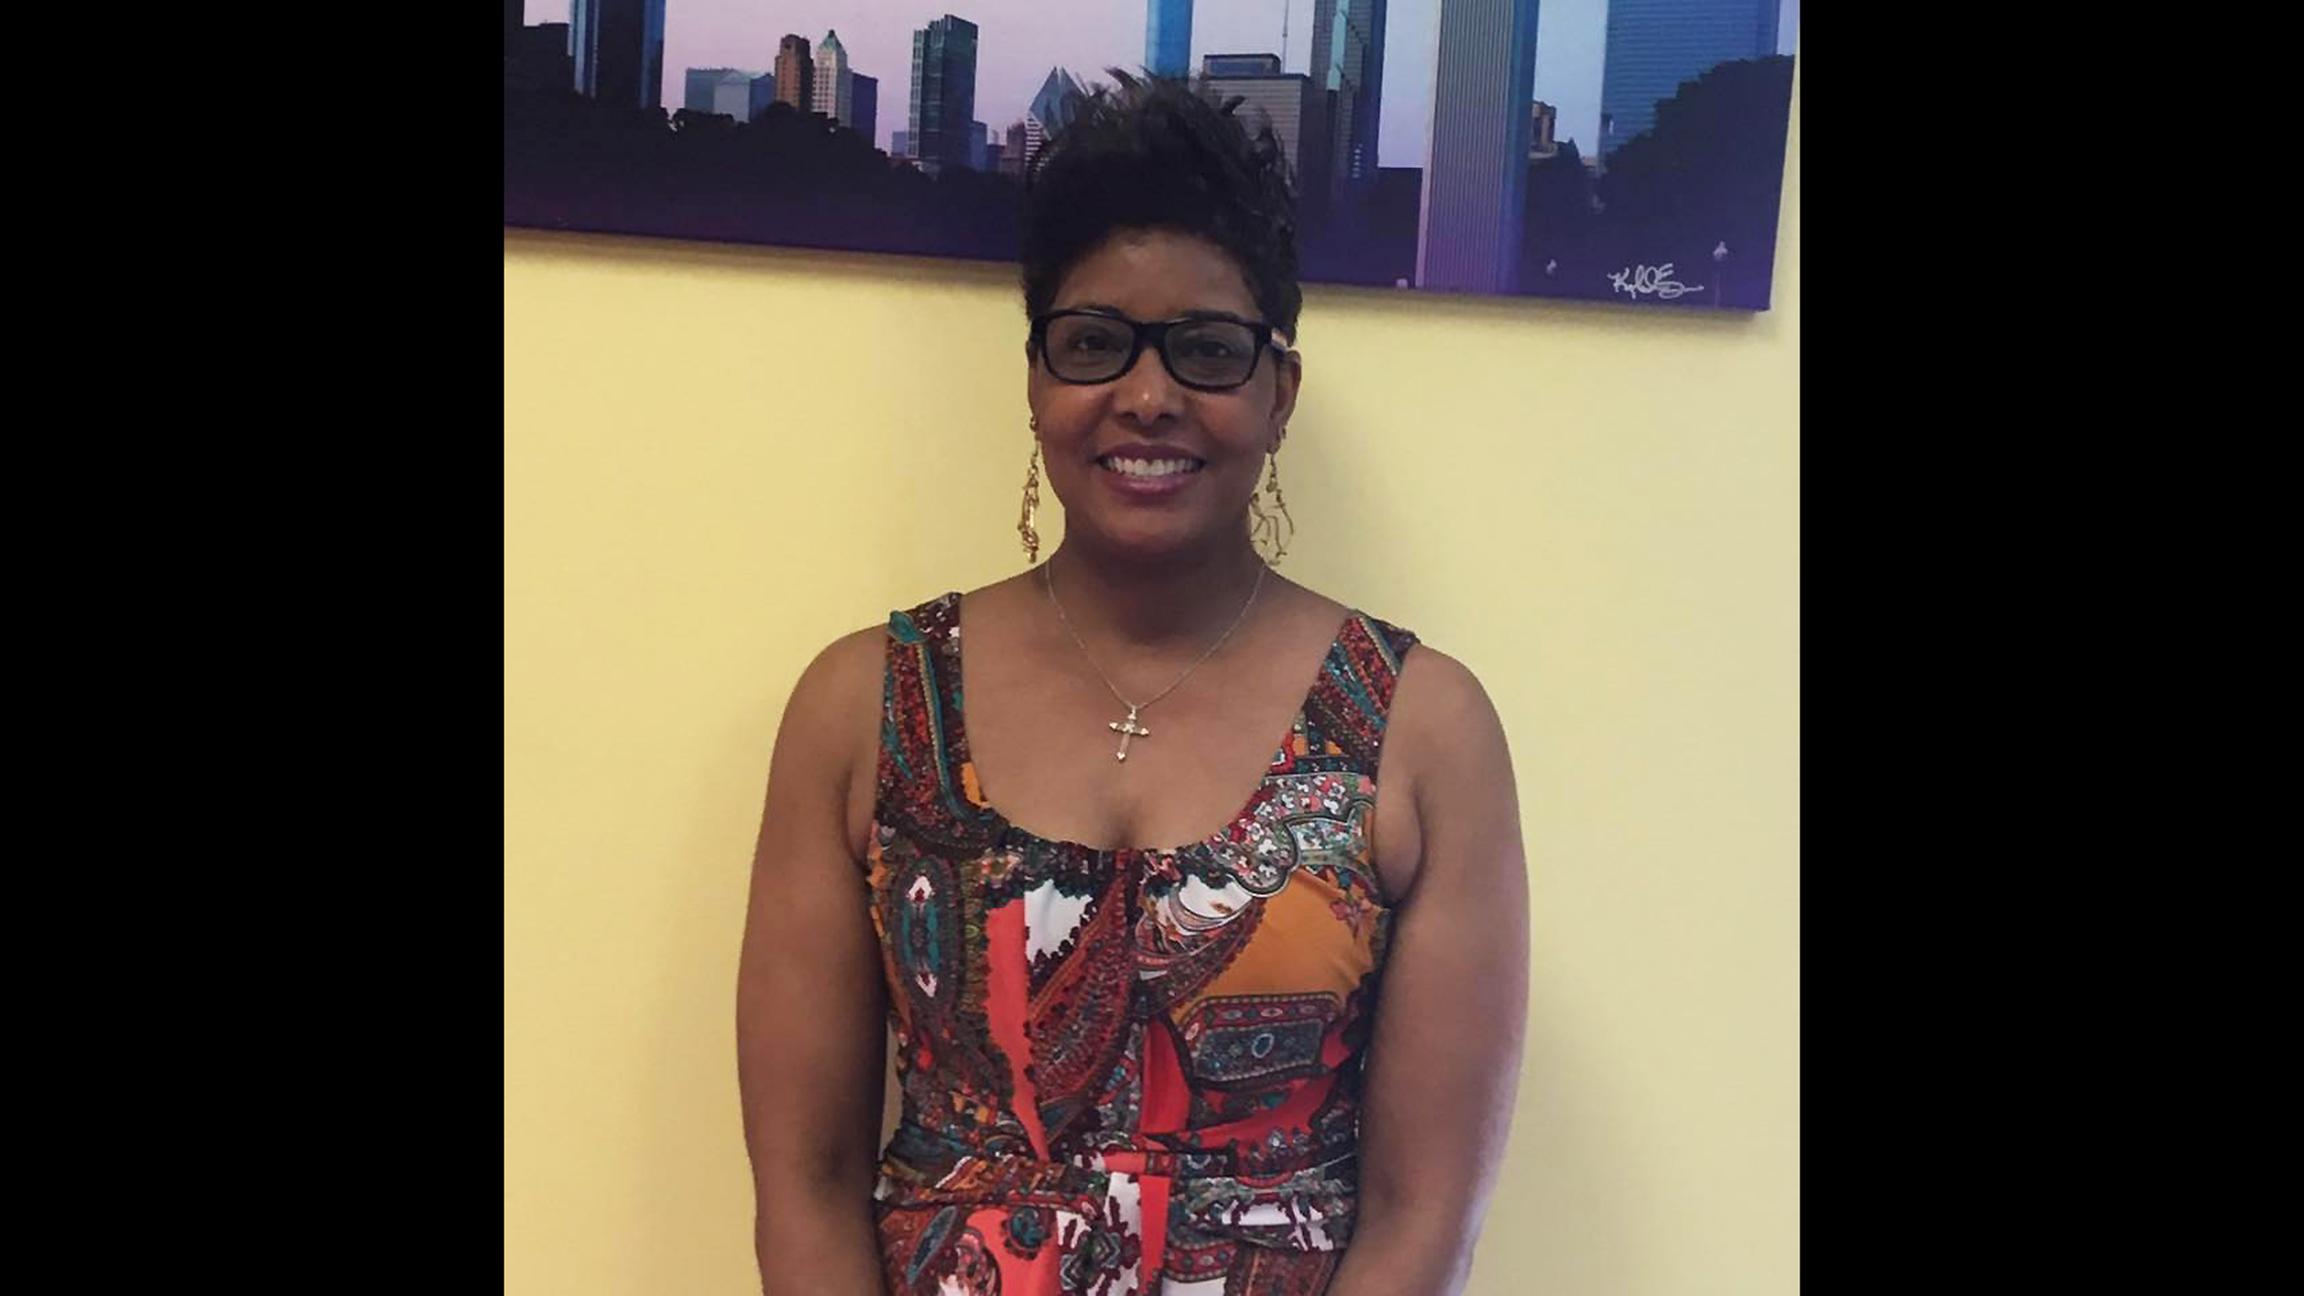 Chicago police officer Shelisa Jones hopes her planned interfaith prayer vigil at Soldier Field will bring peace to Chicago. "We've gotten so callous with what's happening. How can we be like that?" she said. (Courtesy of Shelisa Jones)